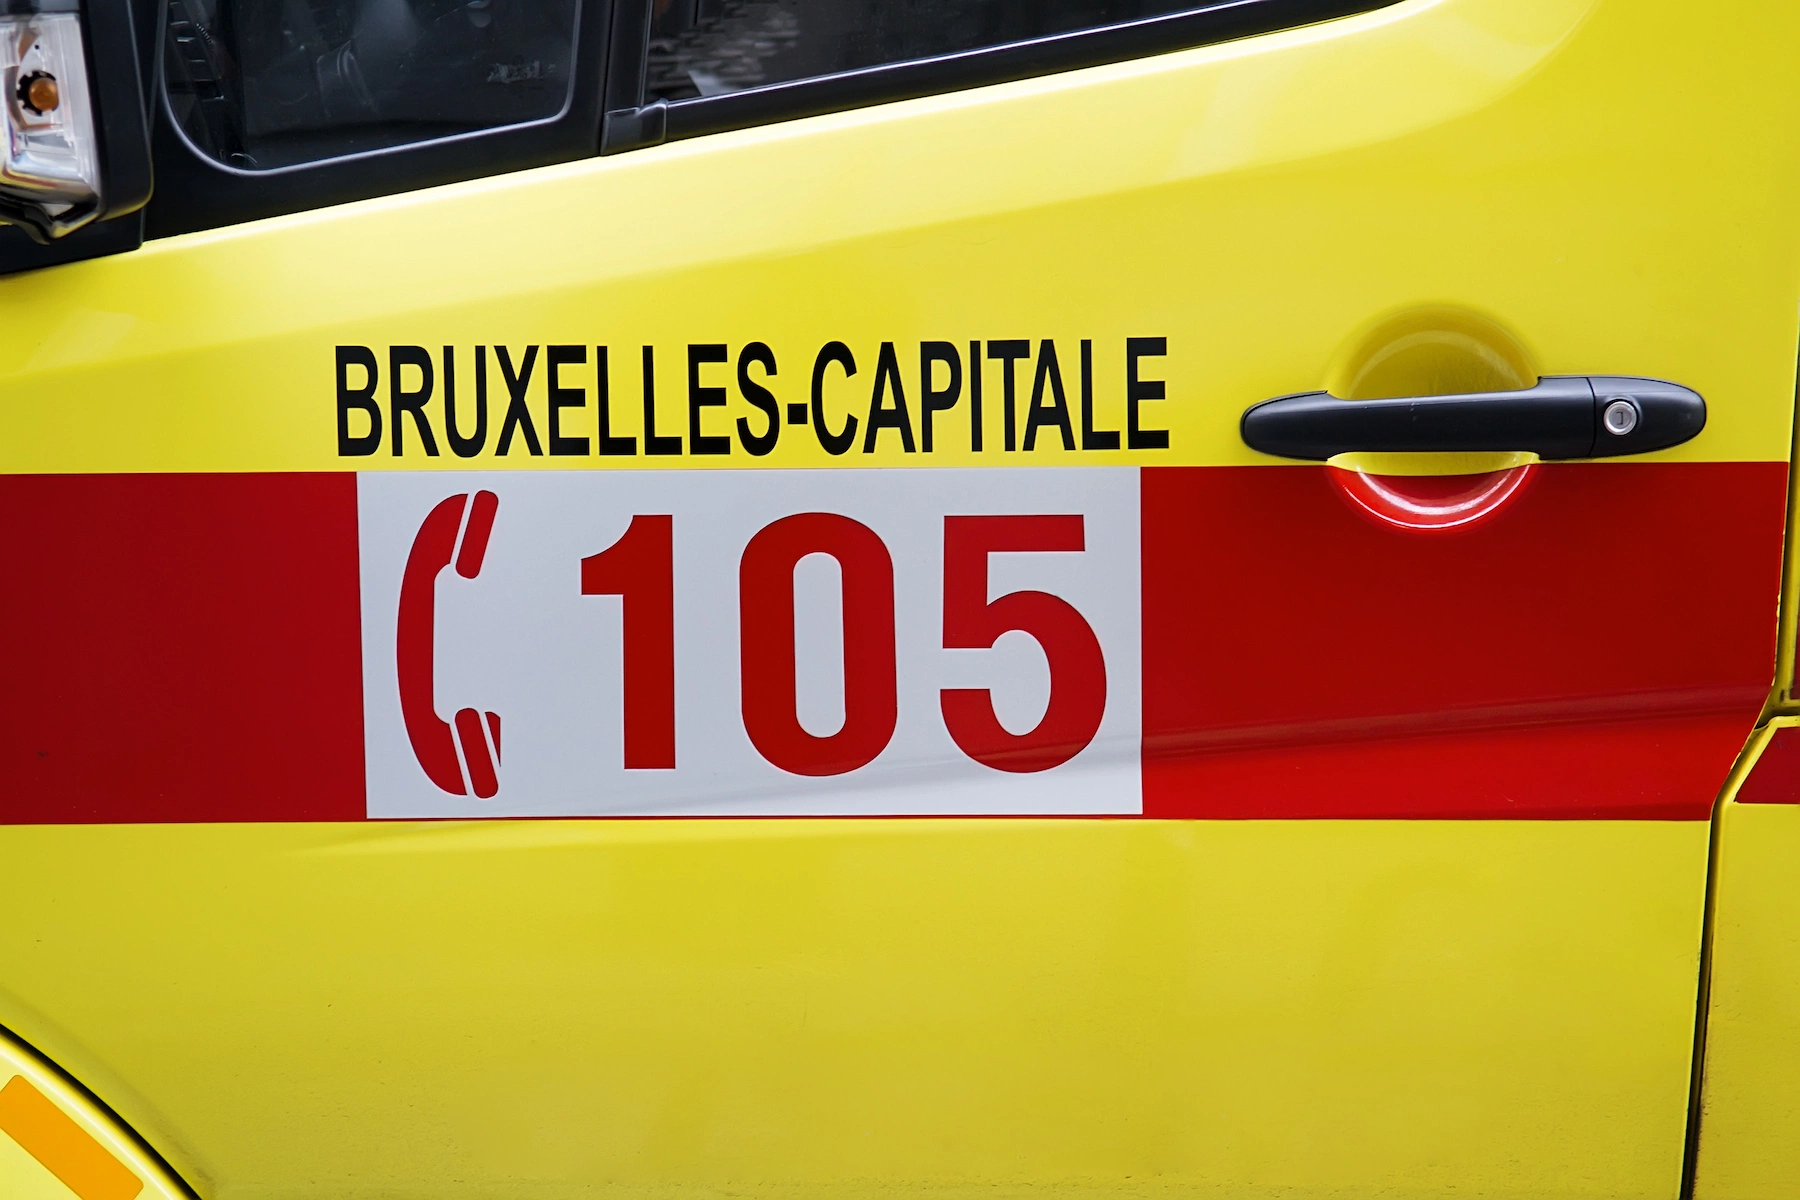 An emergency number for Belgium is displayed on the drivers side door of an ambulance